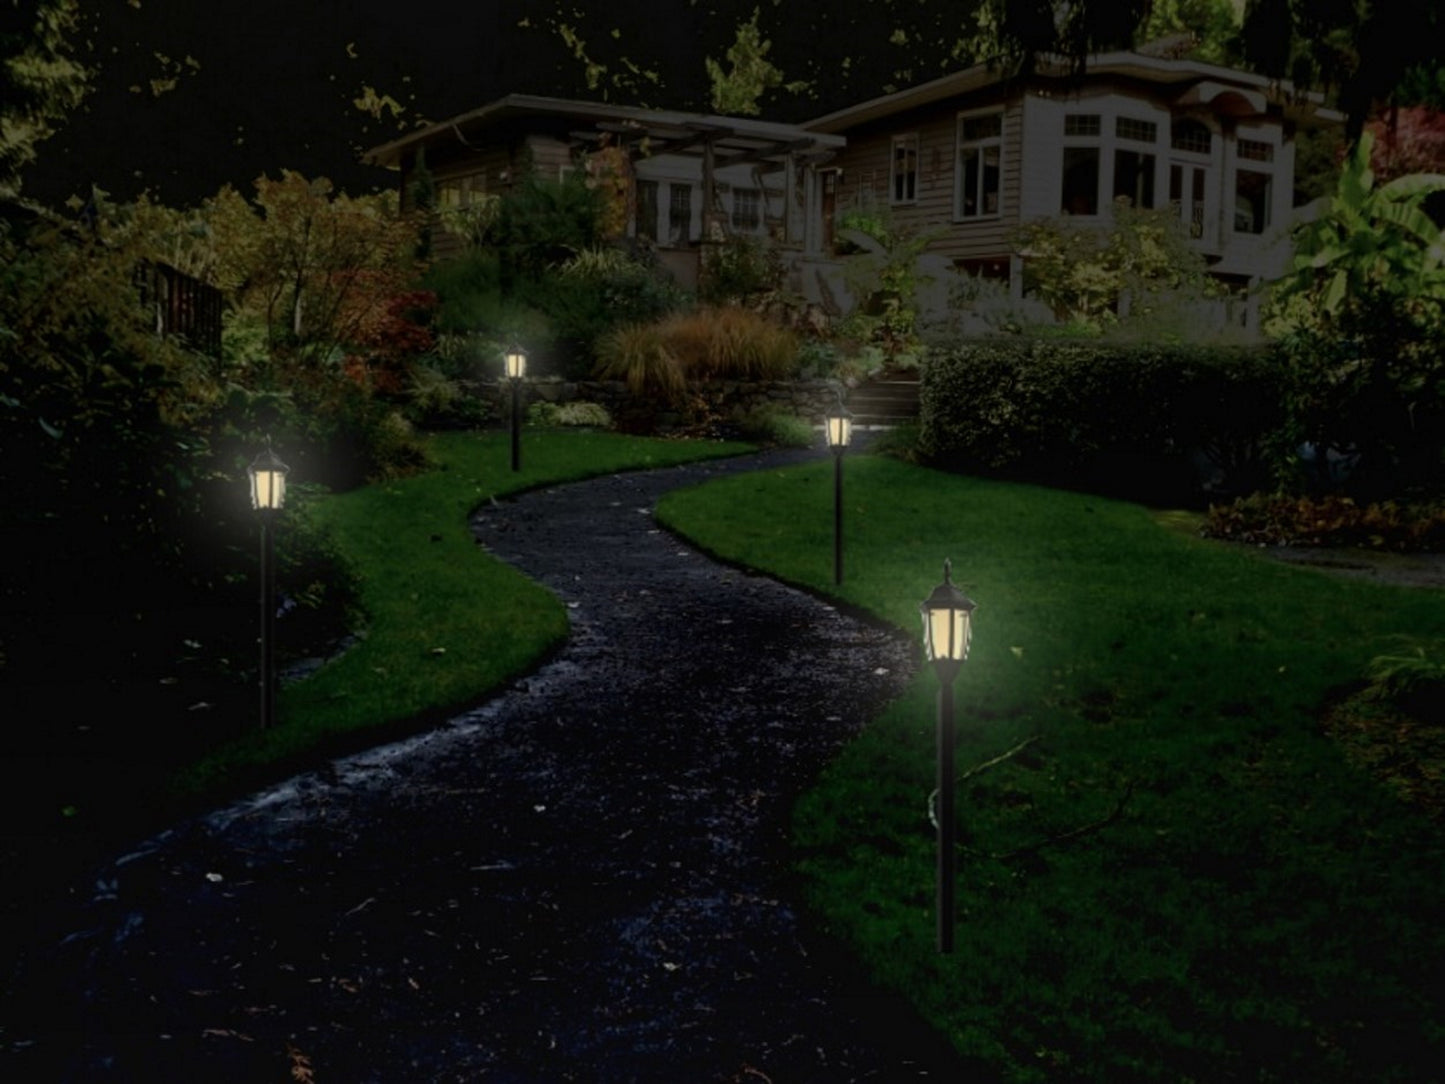 Solar Classic Pathway Light (Flame Effect)